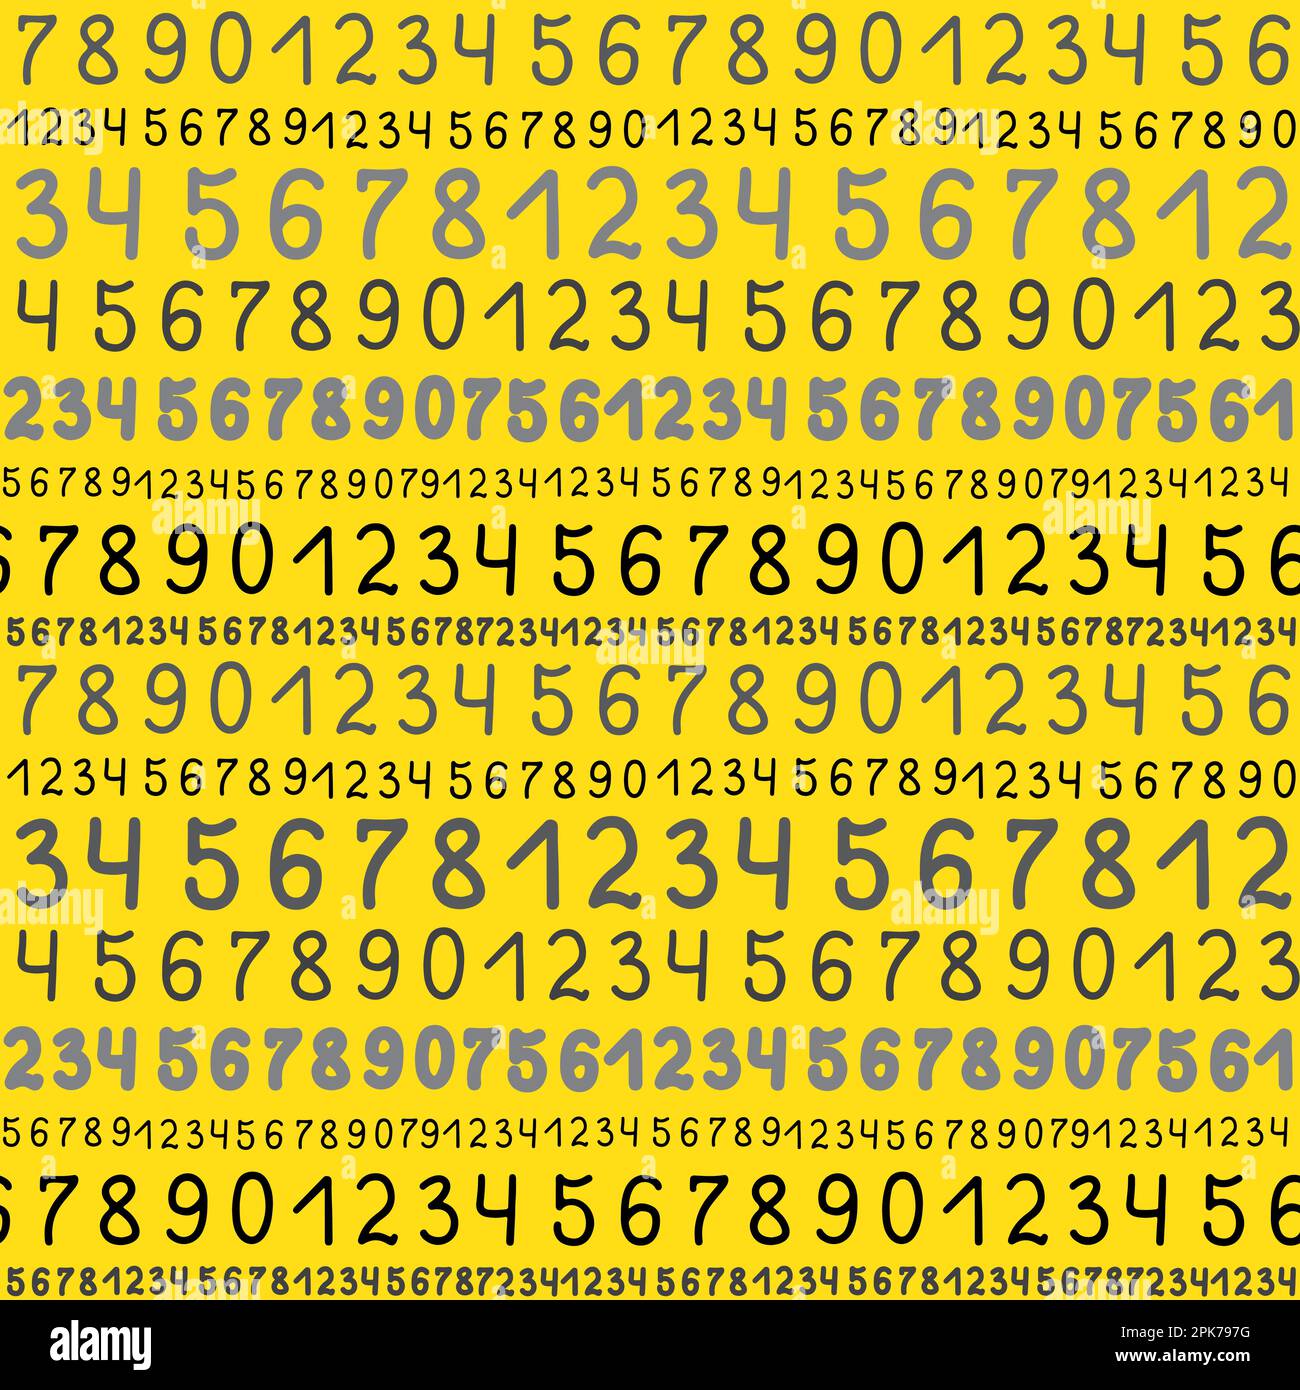 Seamless pattern with lined up numbers on yellow background Stock Vector